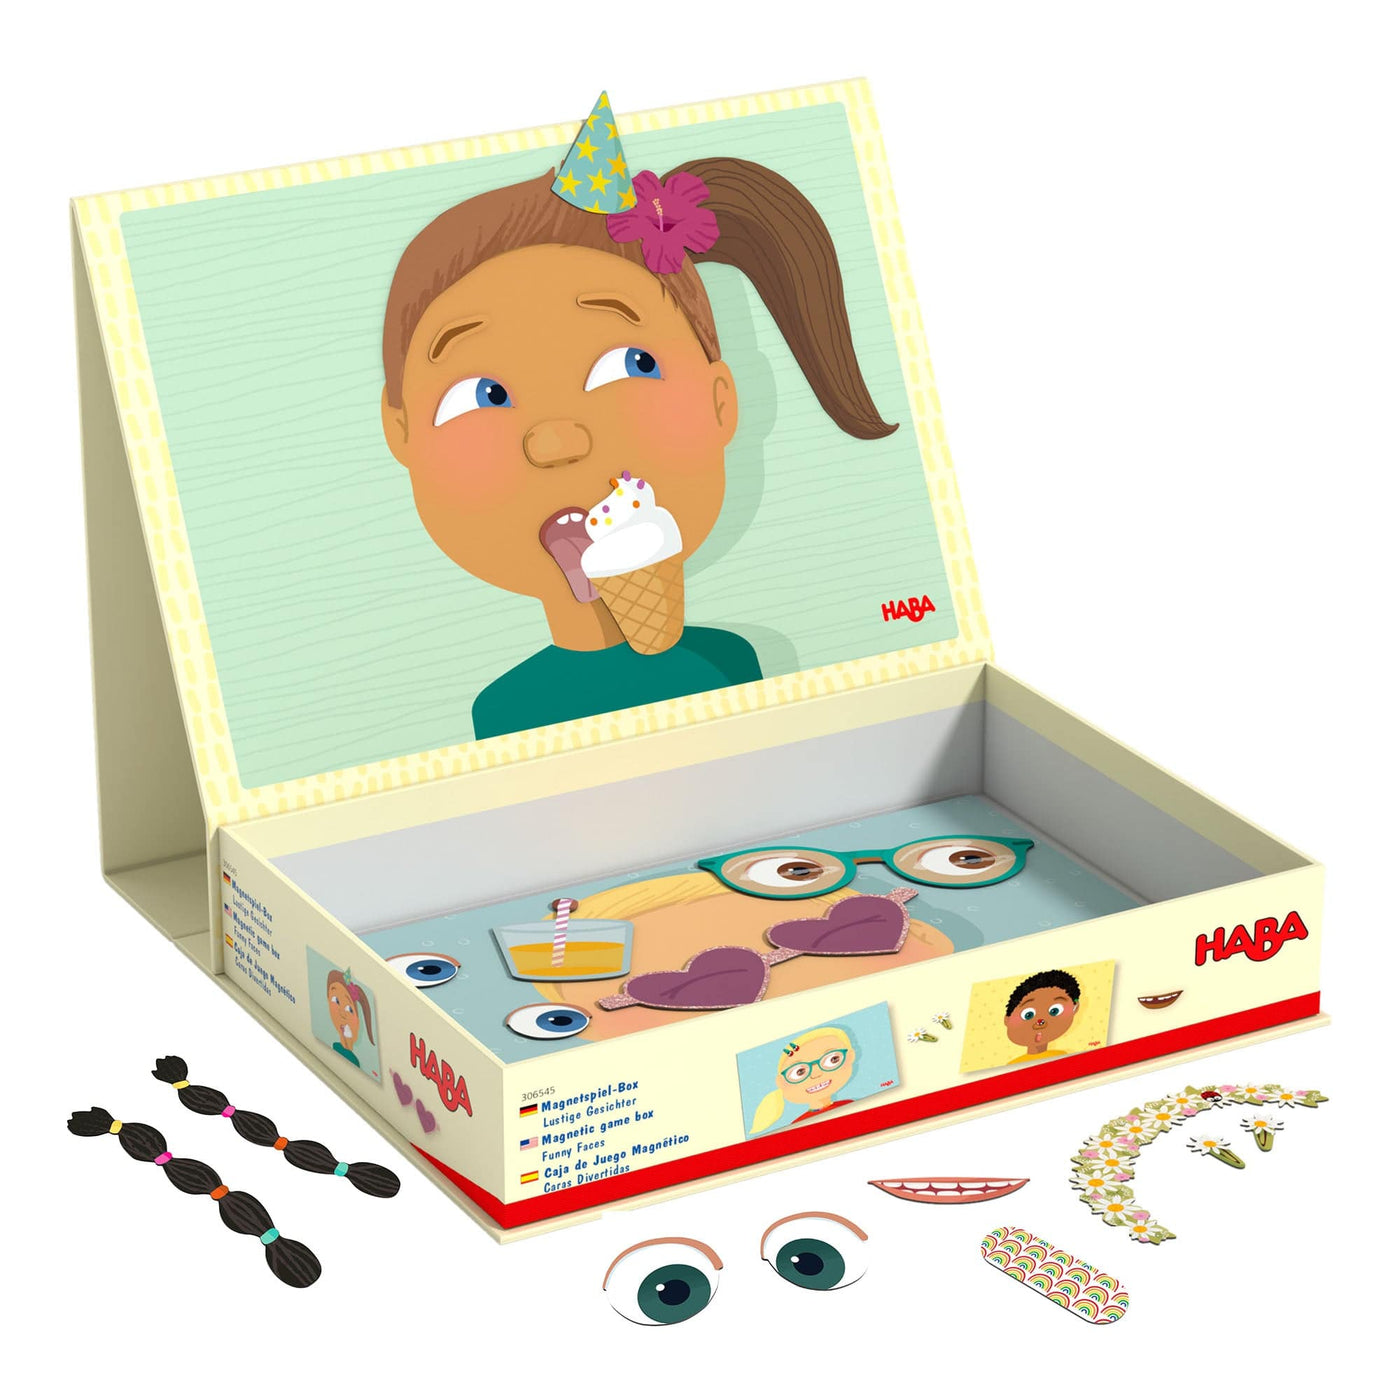 Funny Faces Magnetic Game Box | HABA USA